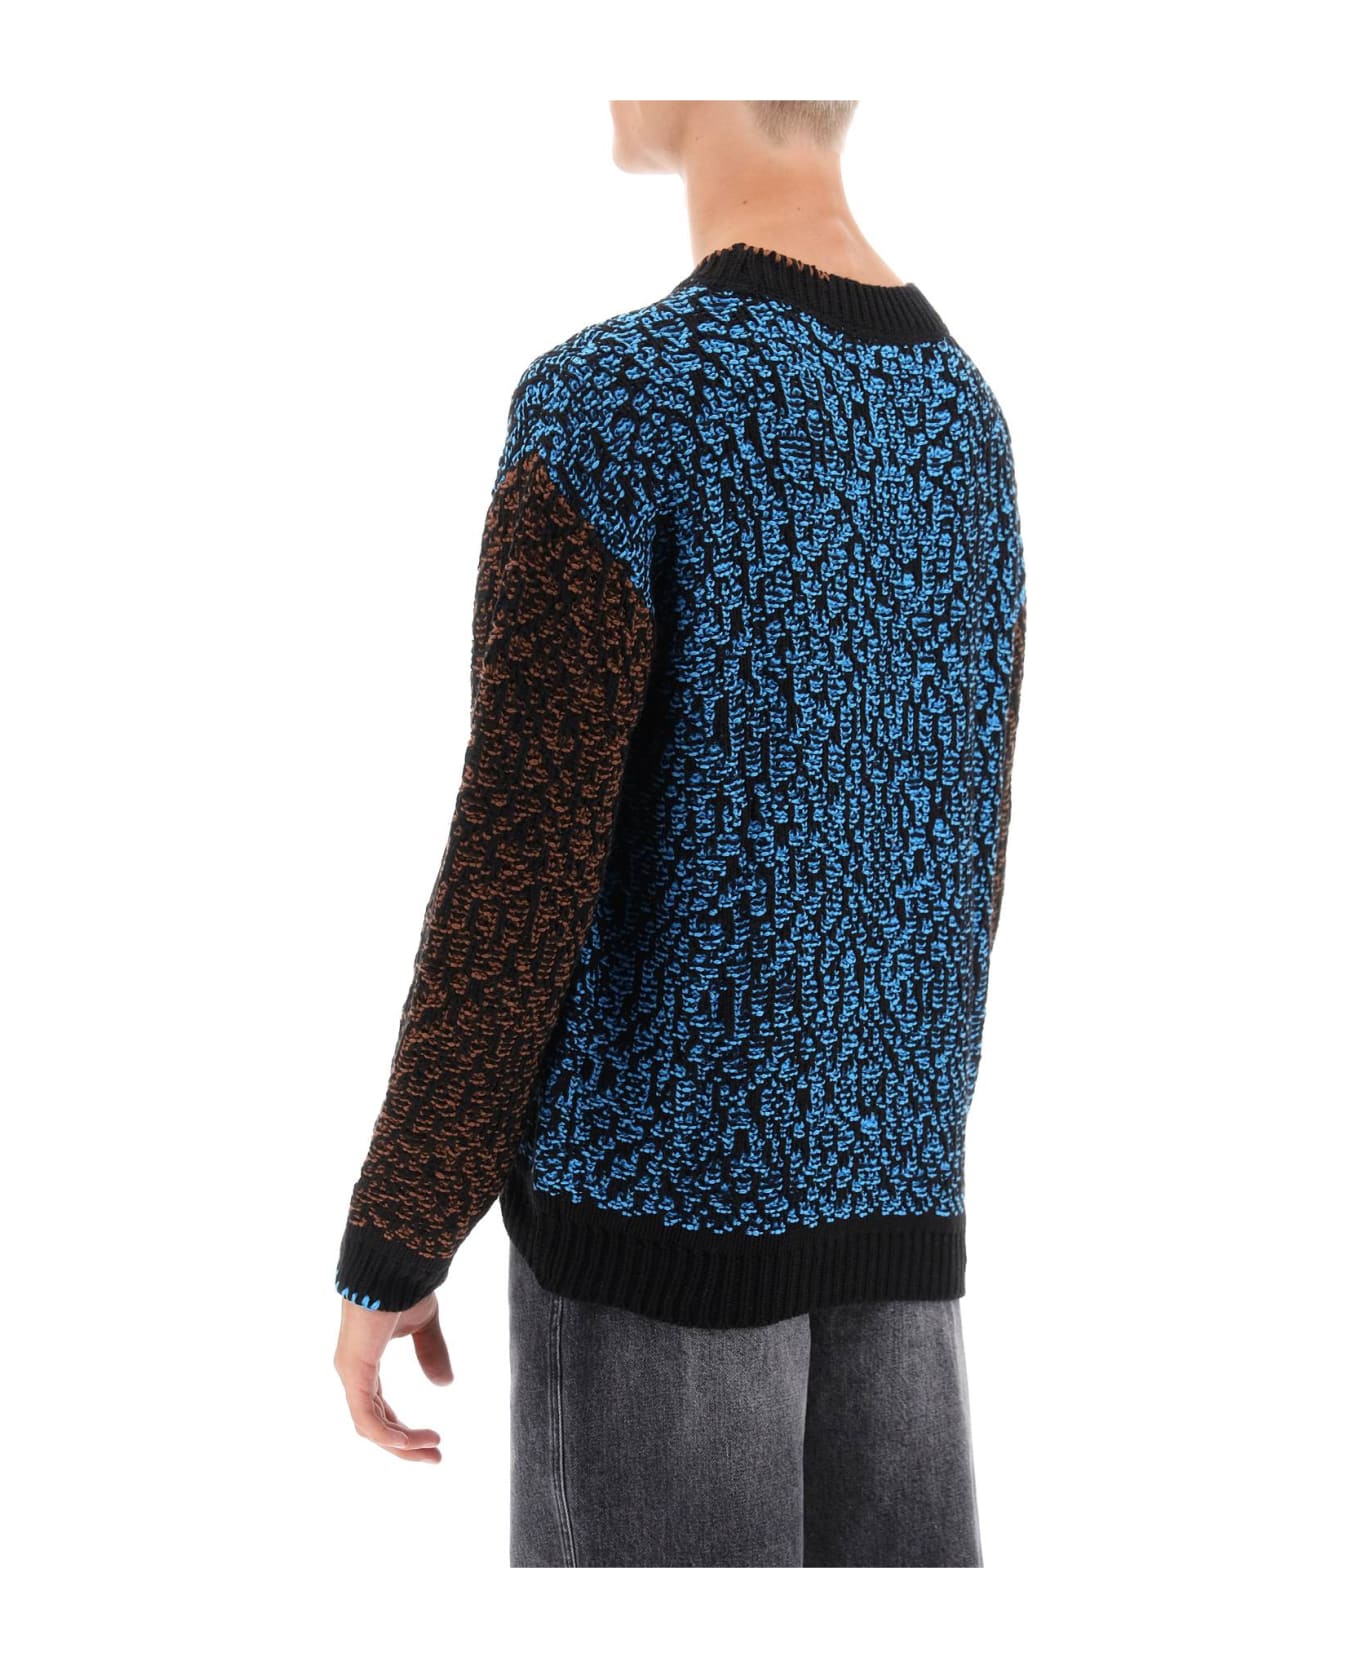 Andersson Bell Multicolored Net Cotton Blend Sweater - MULTI